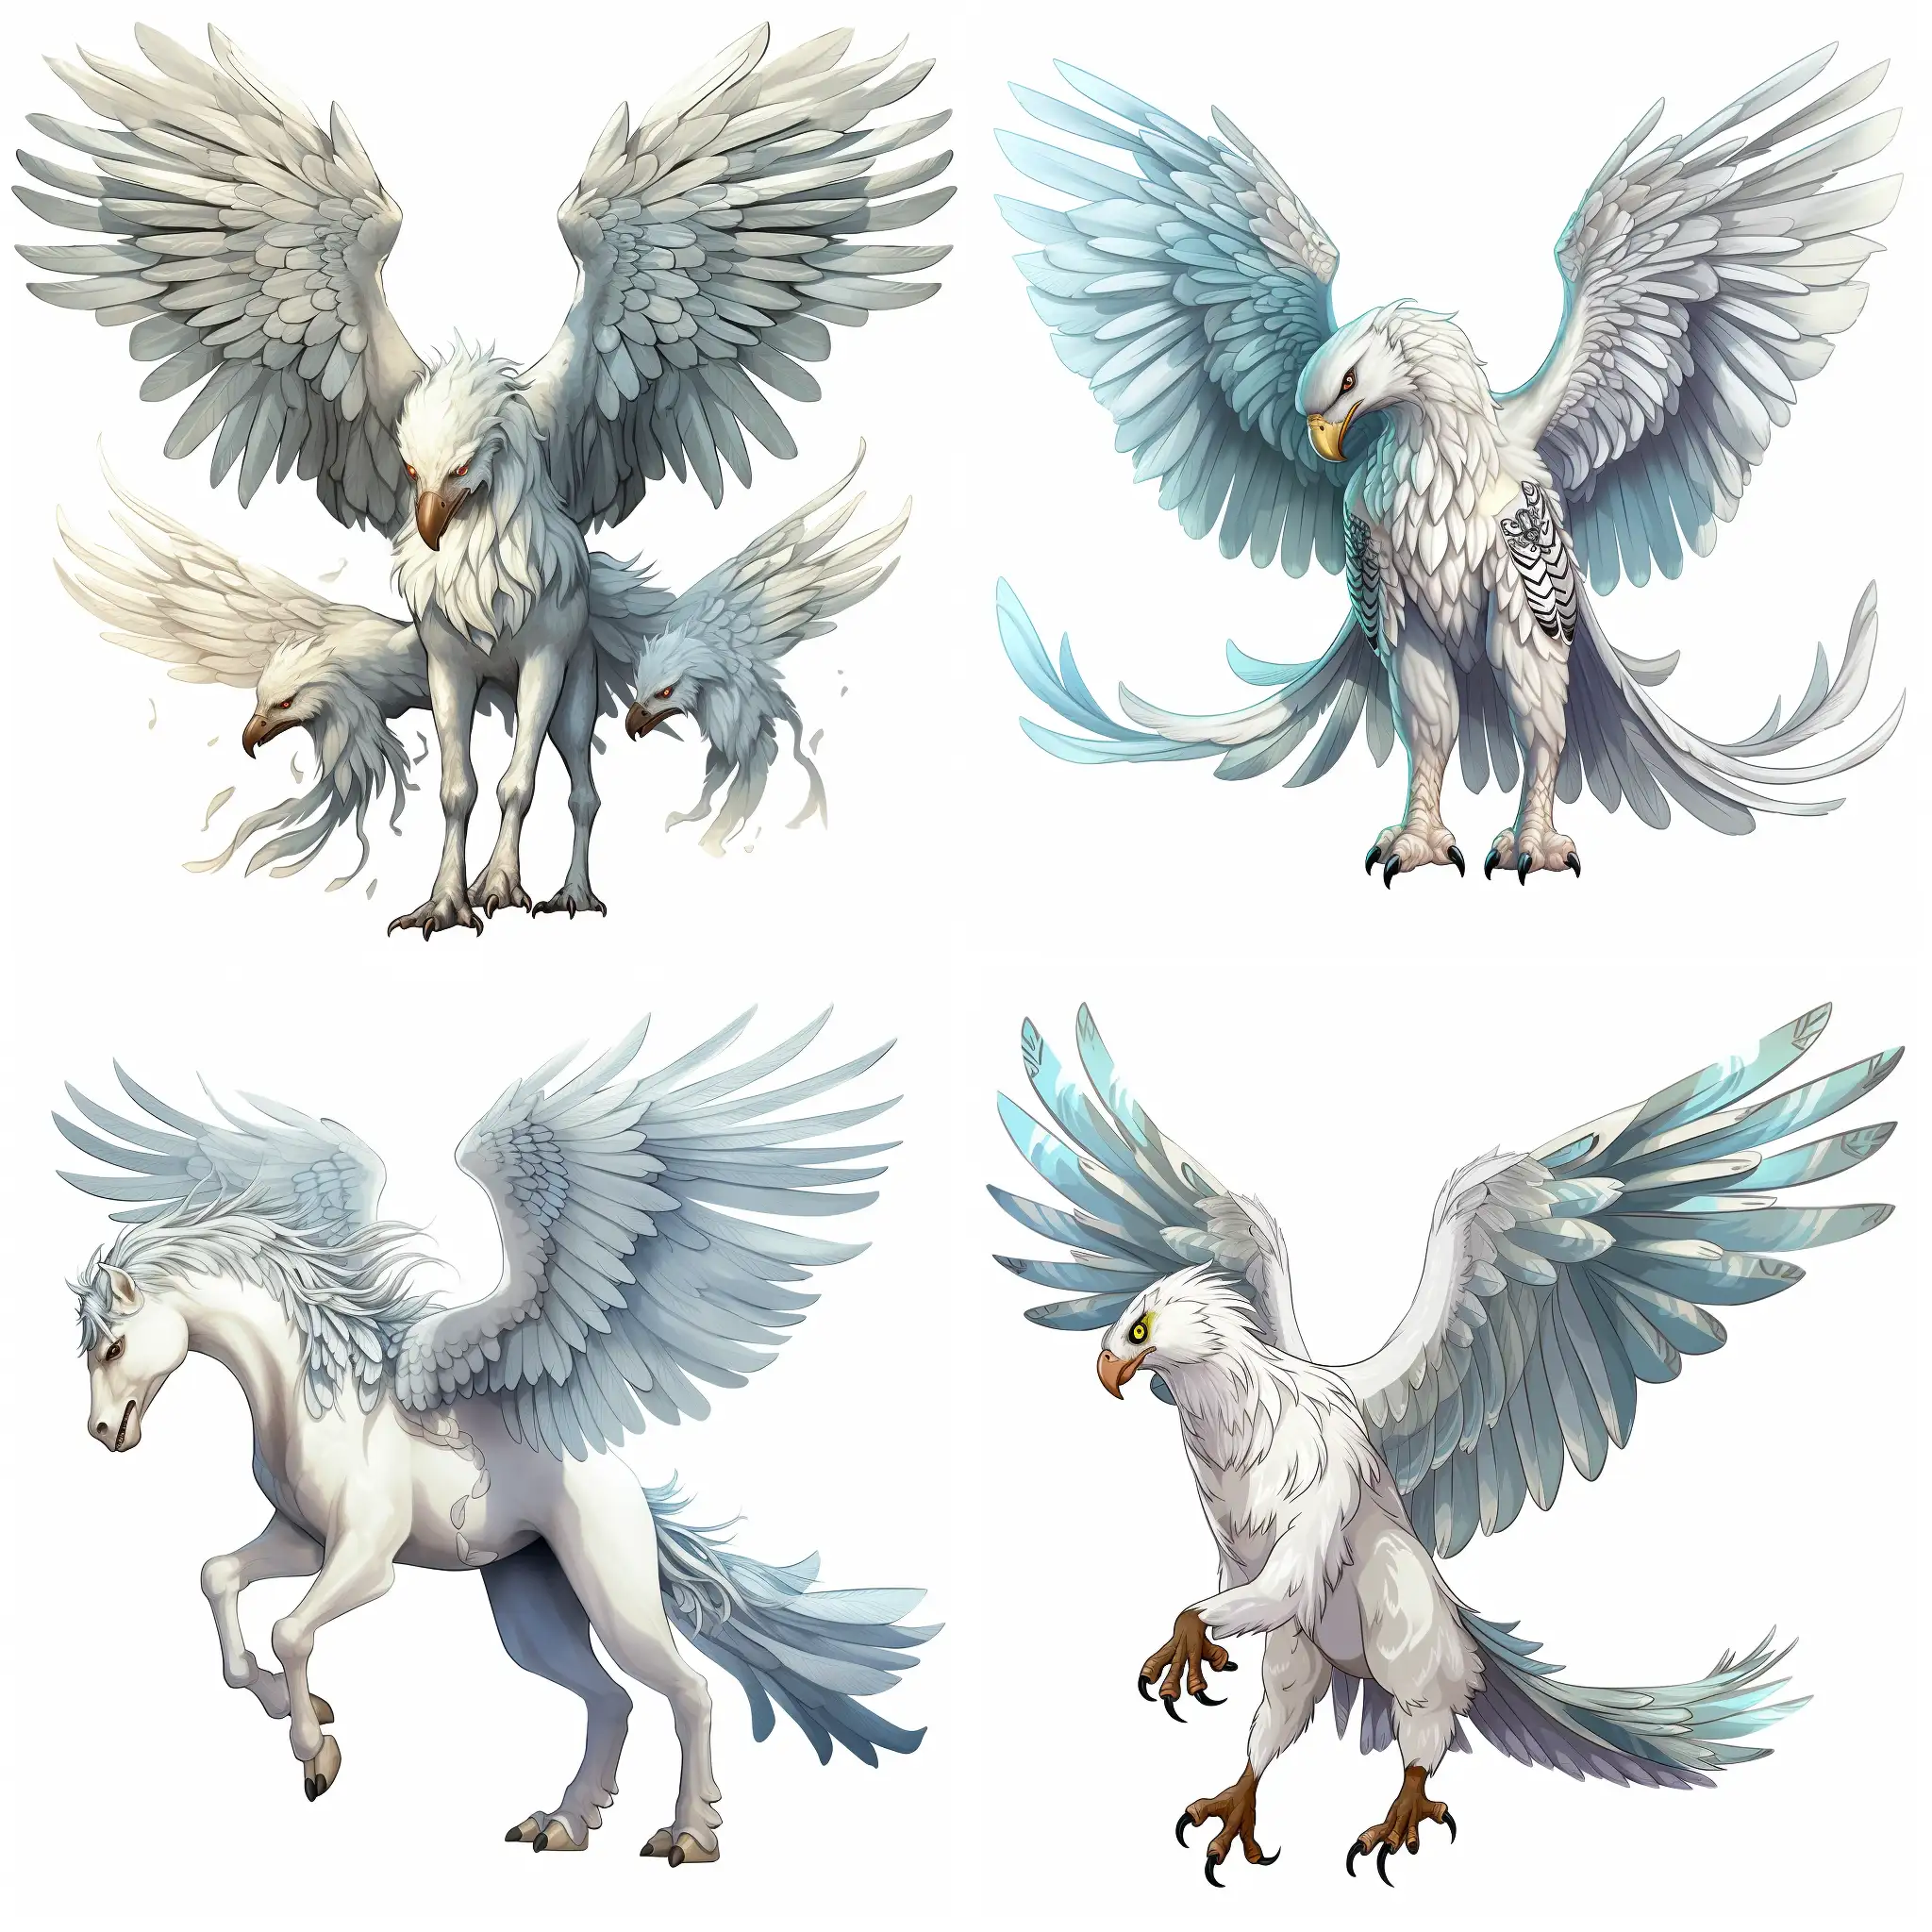 Majestic-White-Hippogriff-Falcon-Illustration-with-Wings-and-Four-Horse-Legs